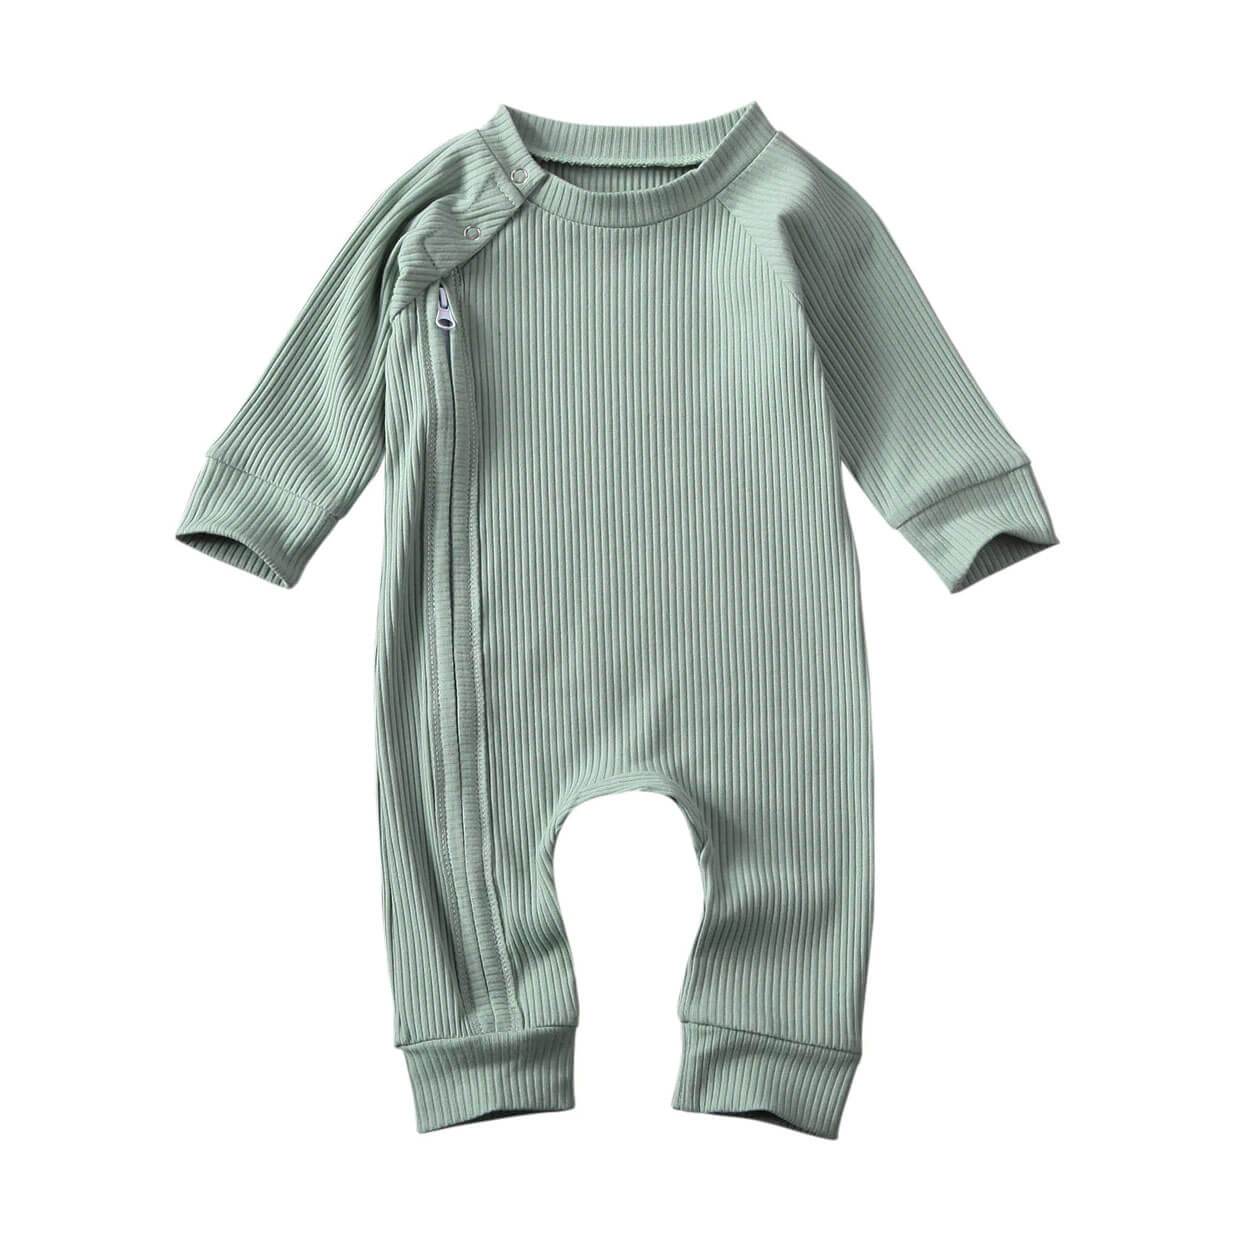 where to shop for hip baby boy clothes – almost makes perfect